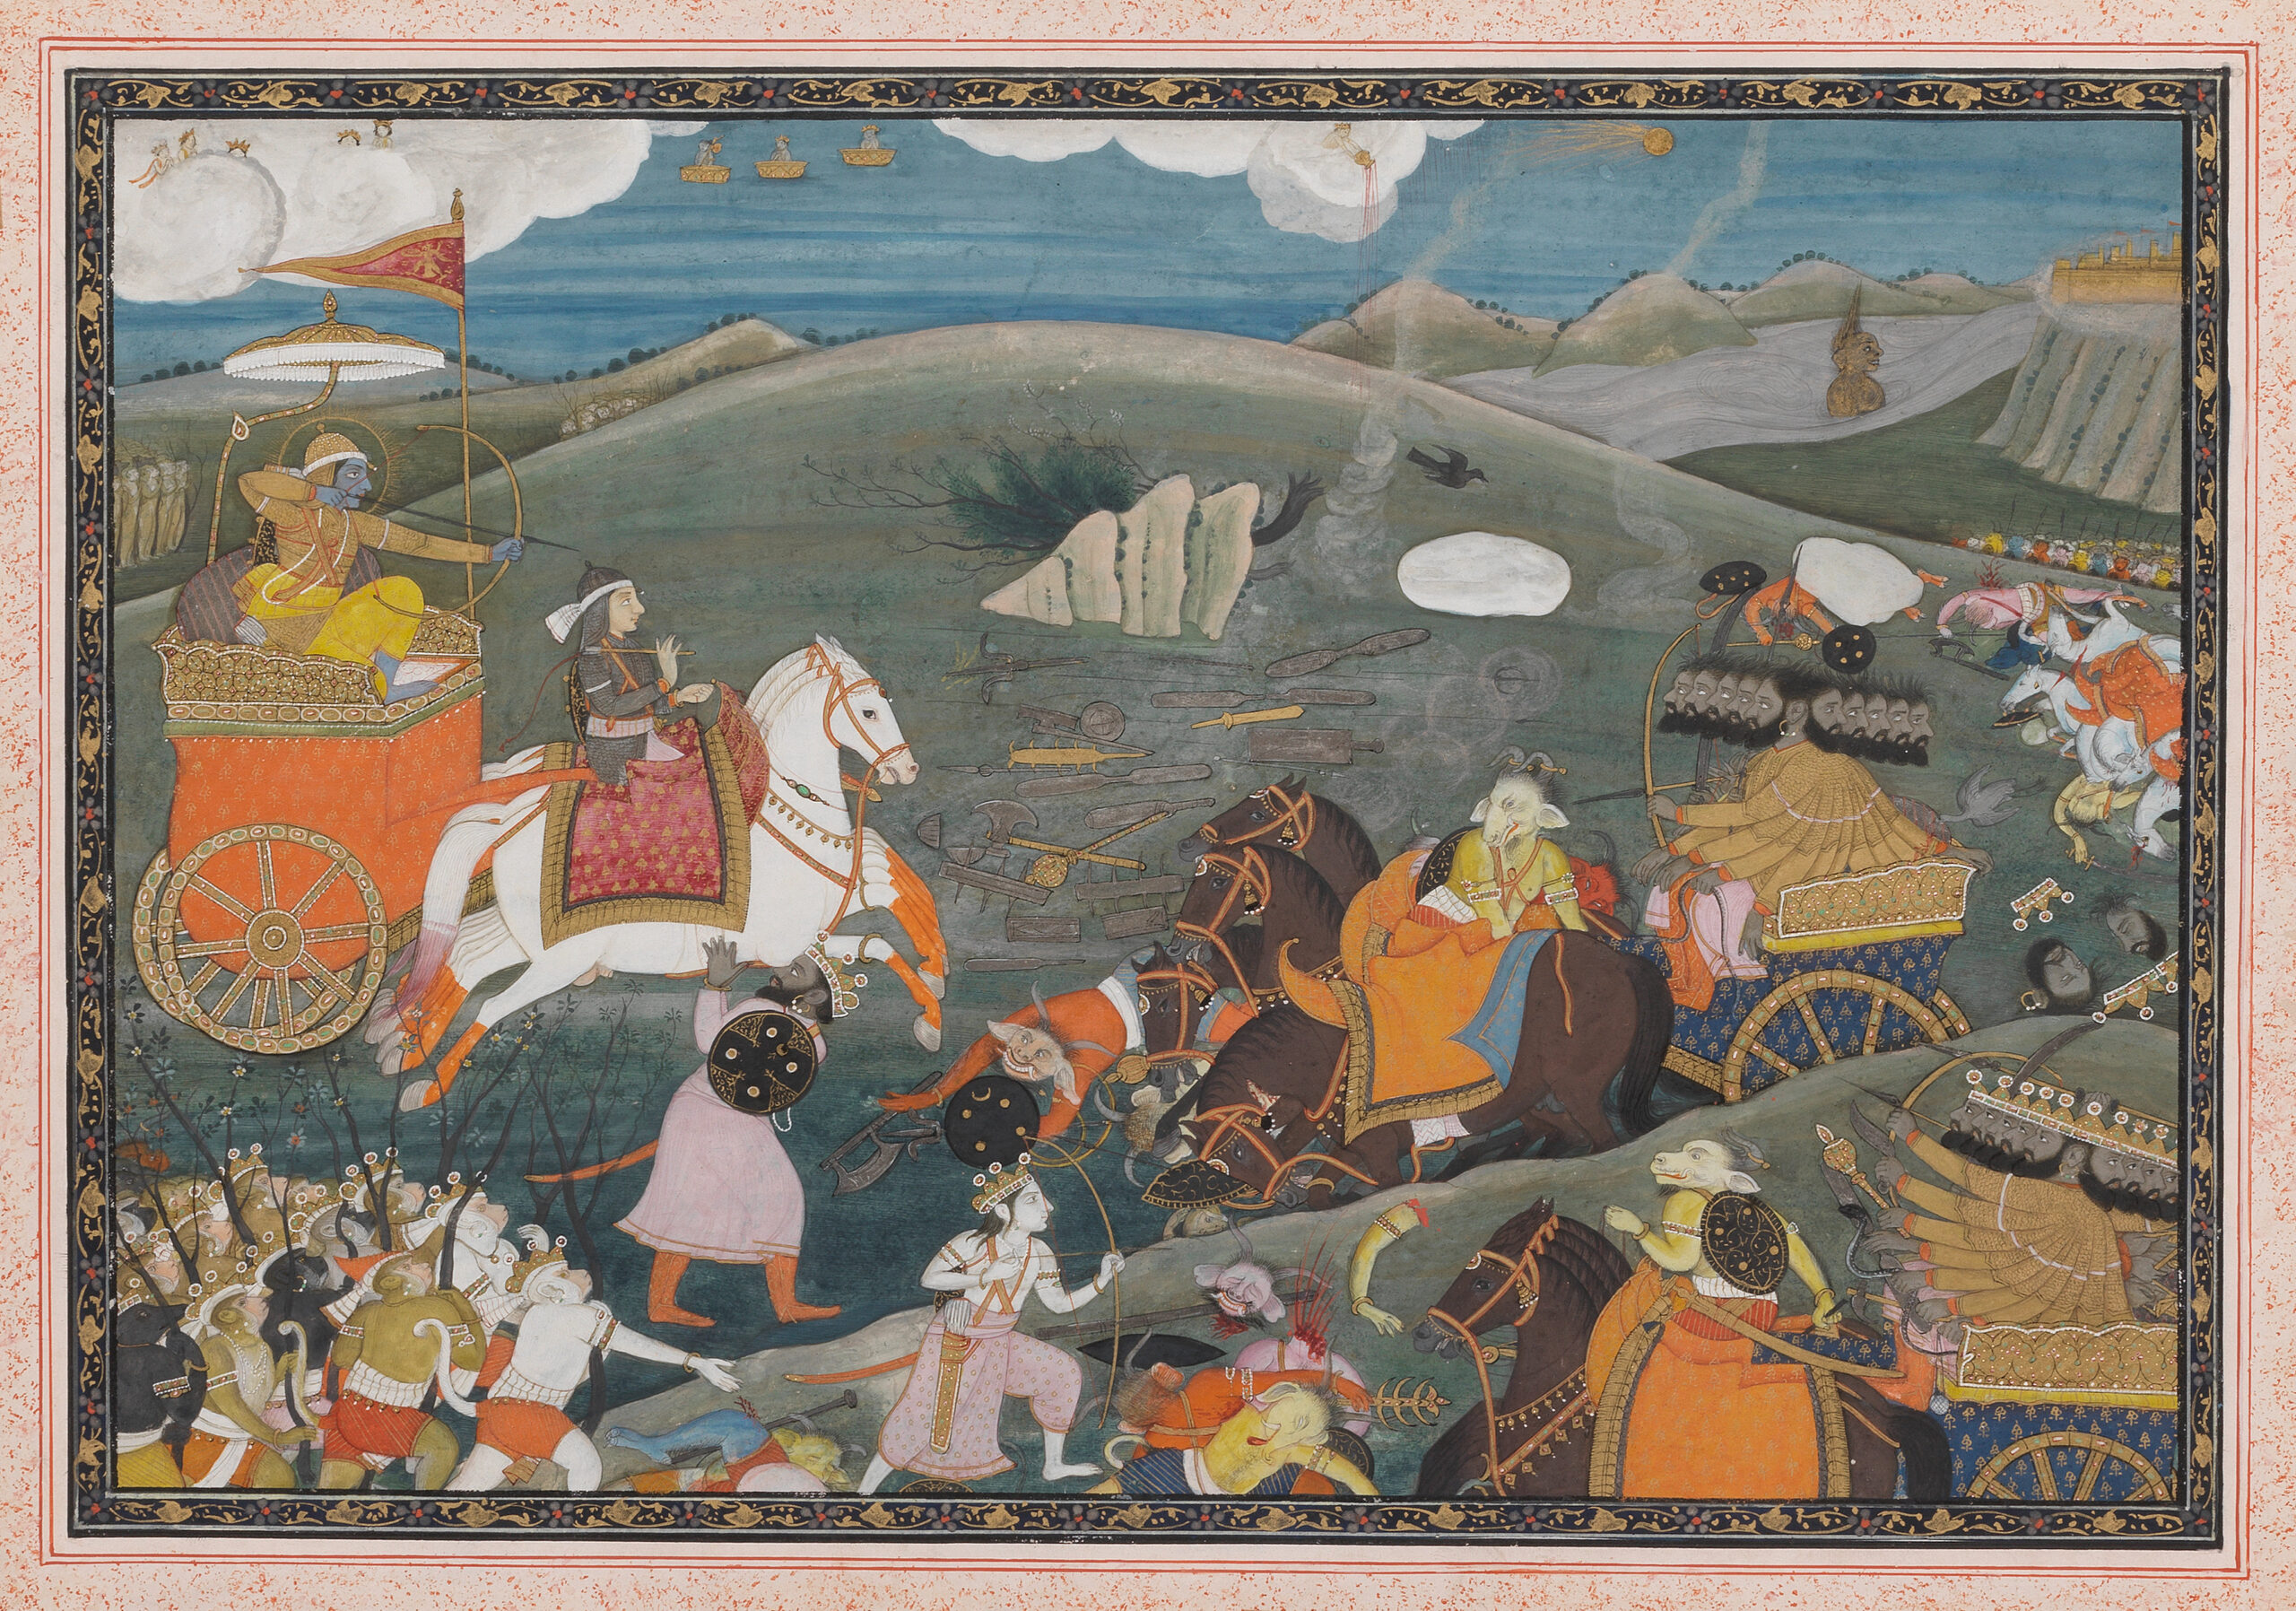 A scene from a Ramayana series (the 'Second' Guler Ramayana), depicting Rama about to kill the demon king Ravana in the battle between the two armies